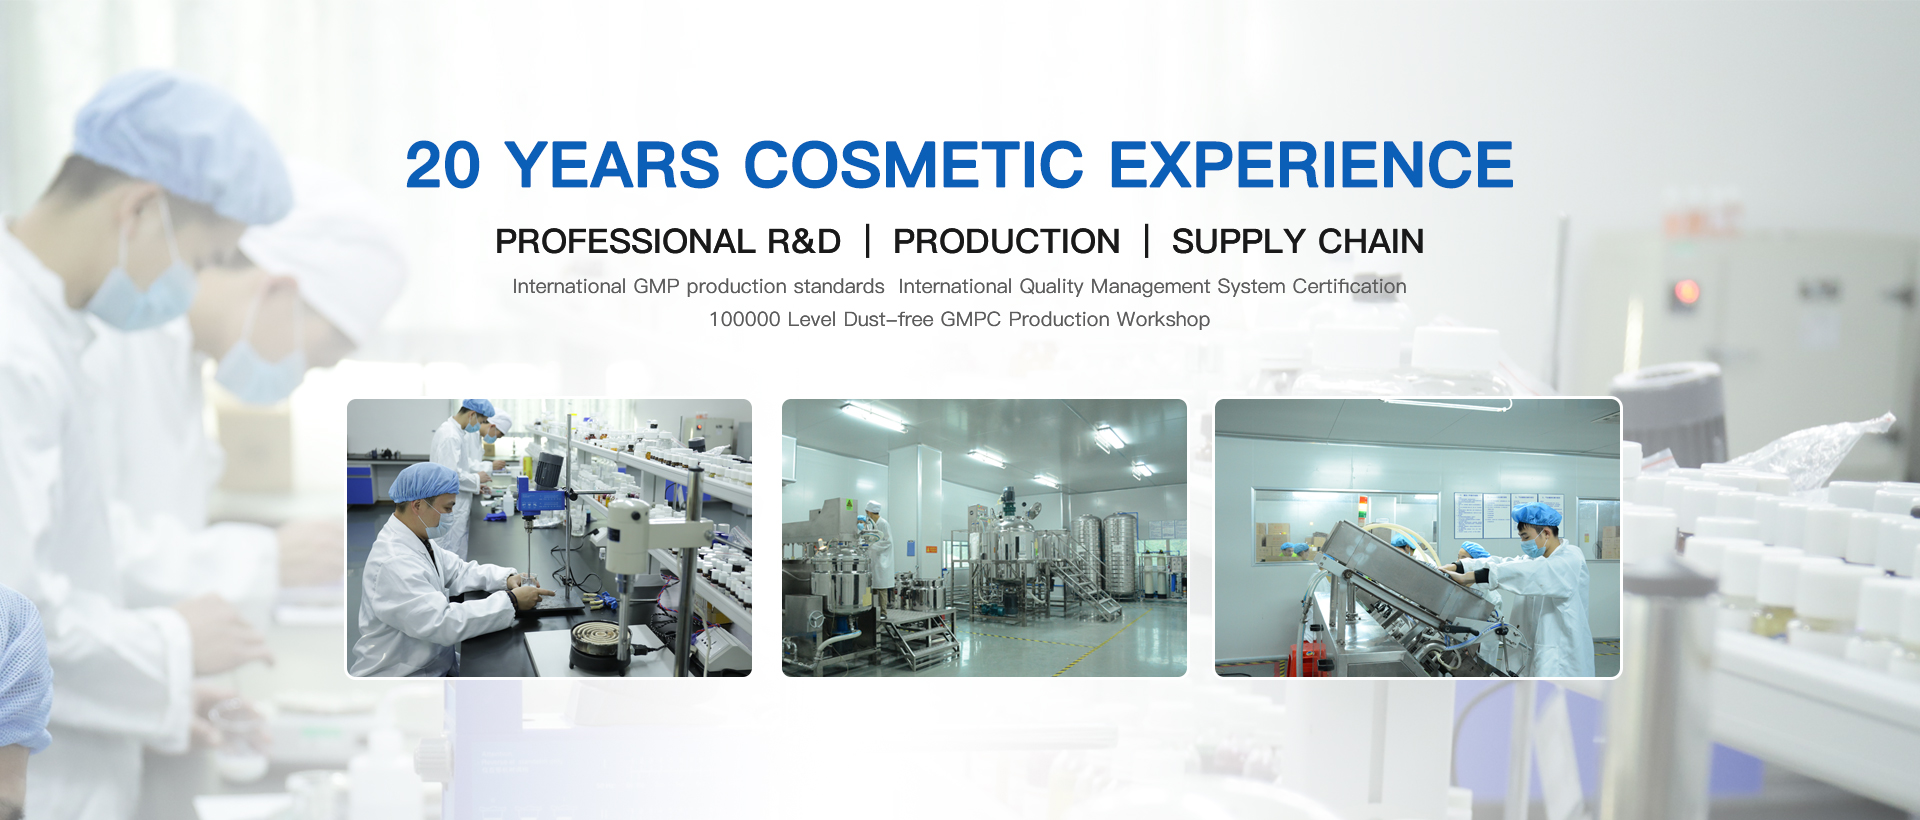 How to achieve sustainable development in the environmental production of cosmetics？